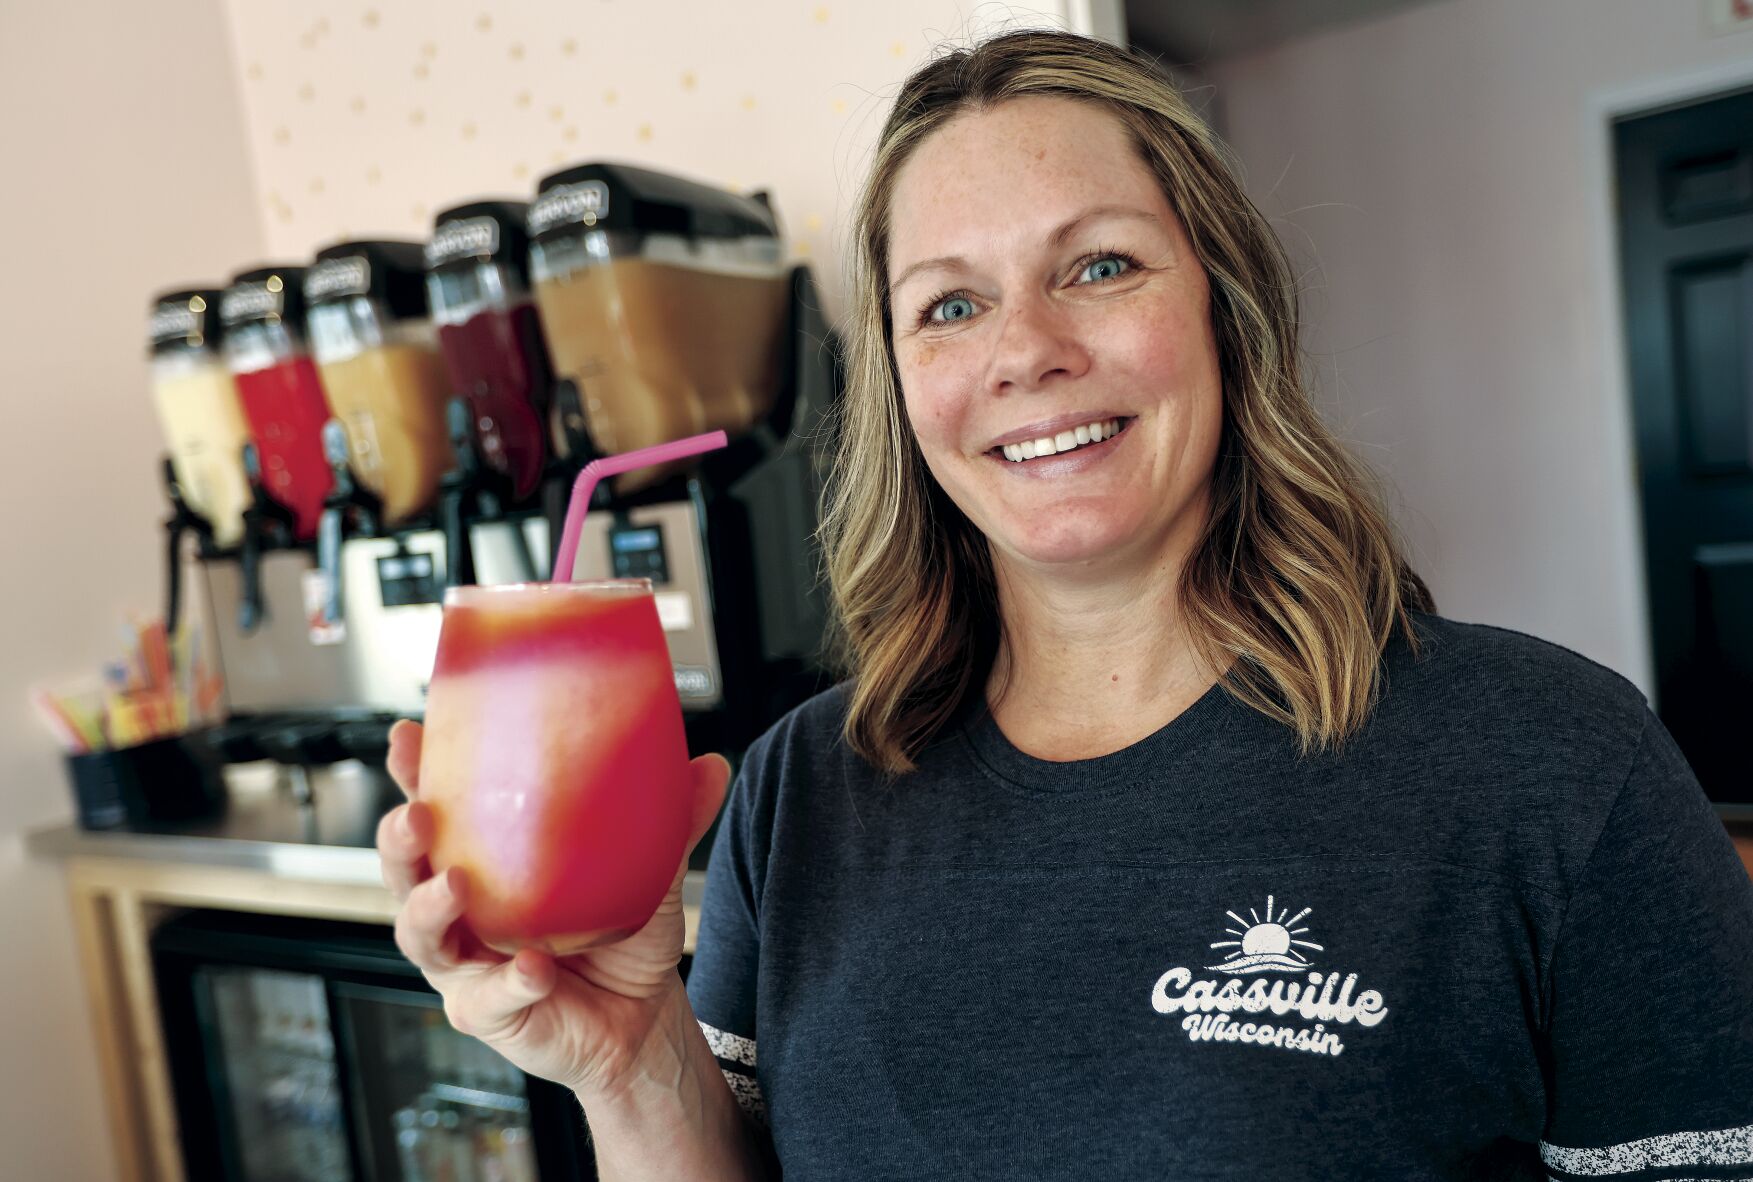 Owner of The Neighborhood Slush, Carrie Wunderlin, holds one of her wine slushy drinks at her business located in Cassville, Wis. The busines opened last month and plans a grand opening party on July 15.    PHOTO CREDIT: Dave Kettering